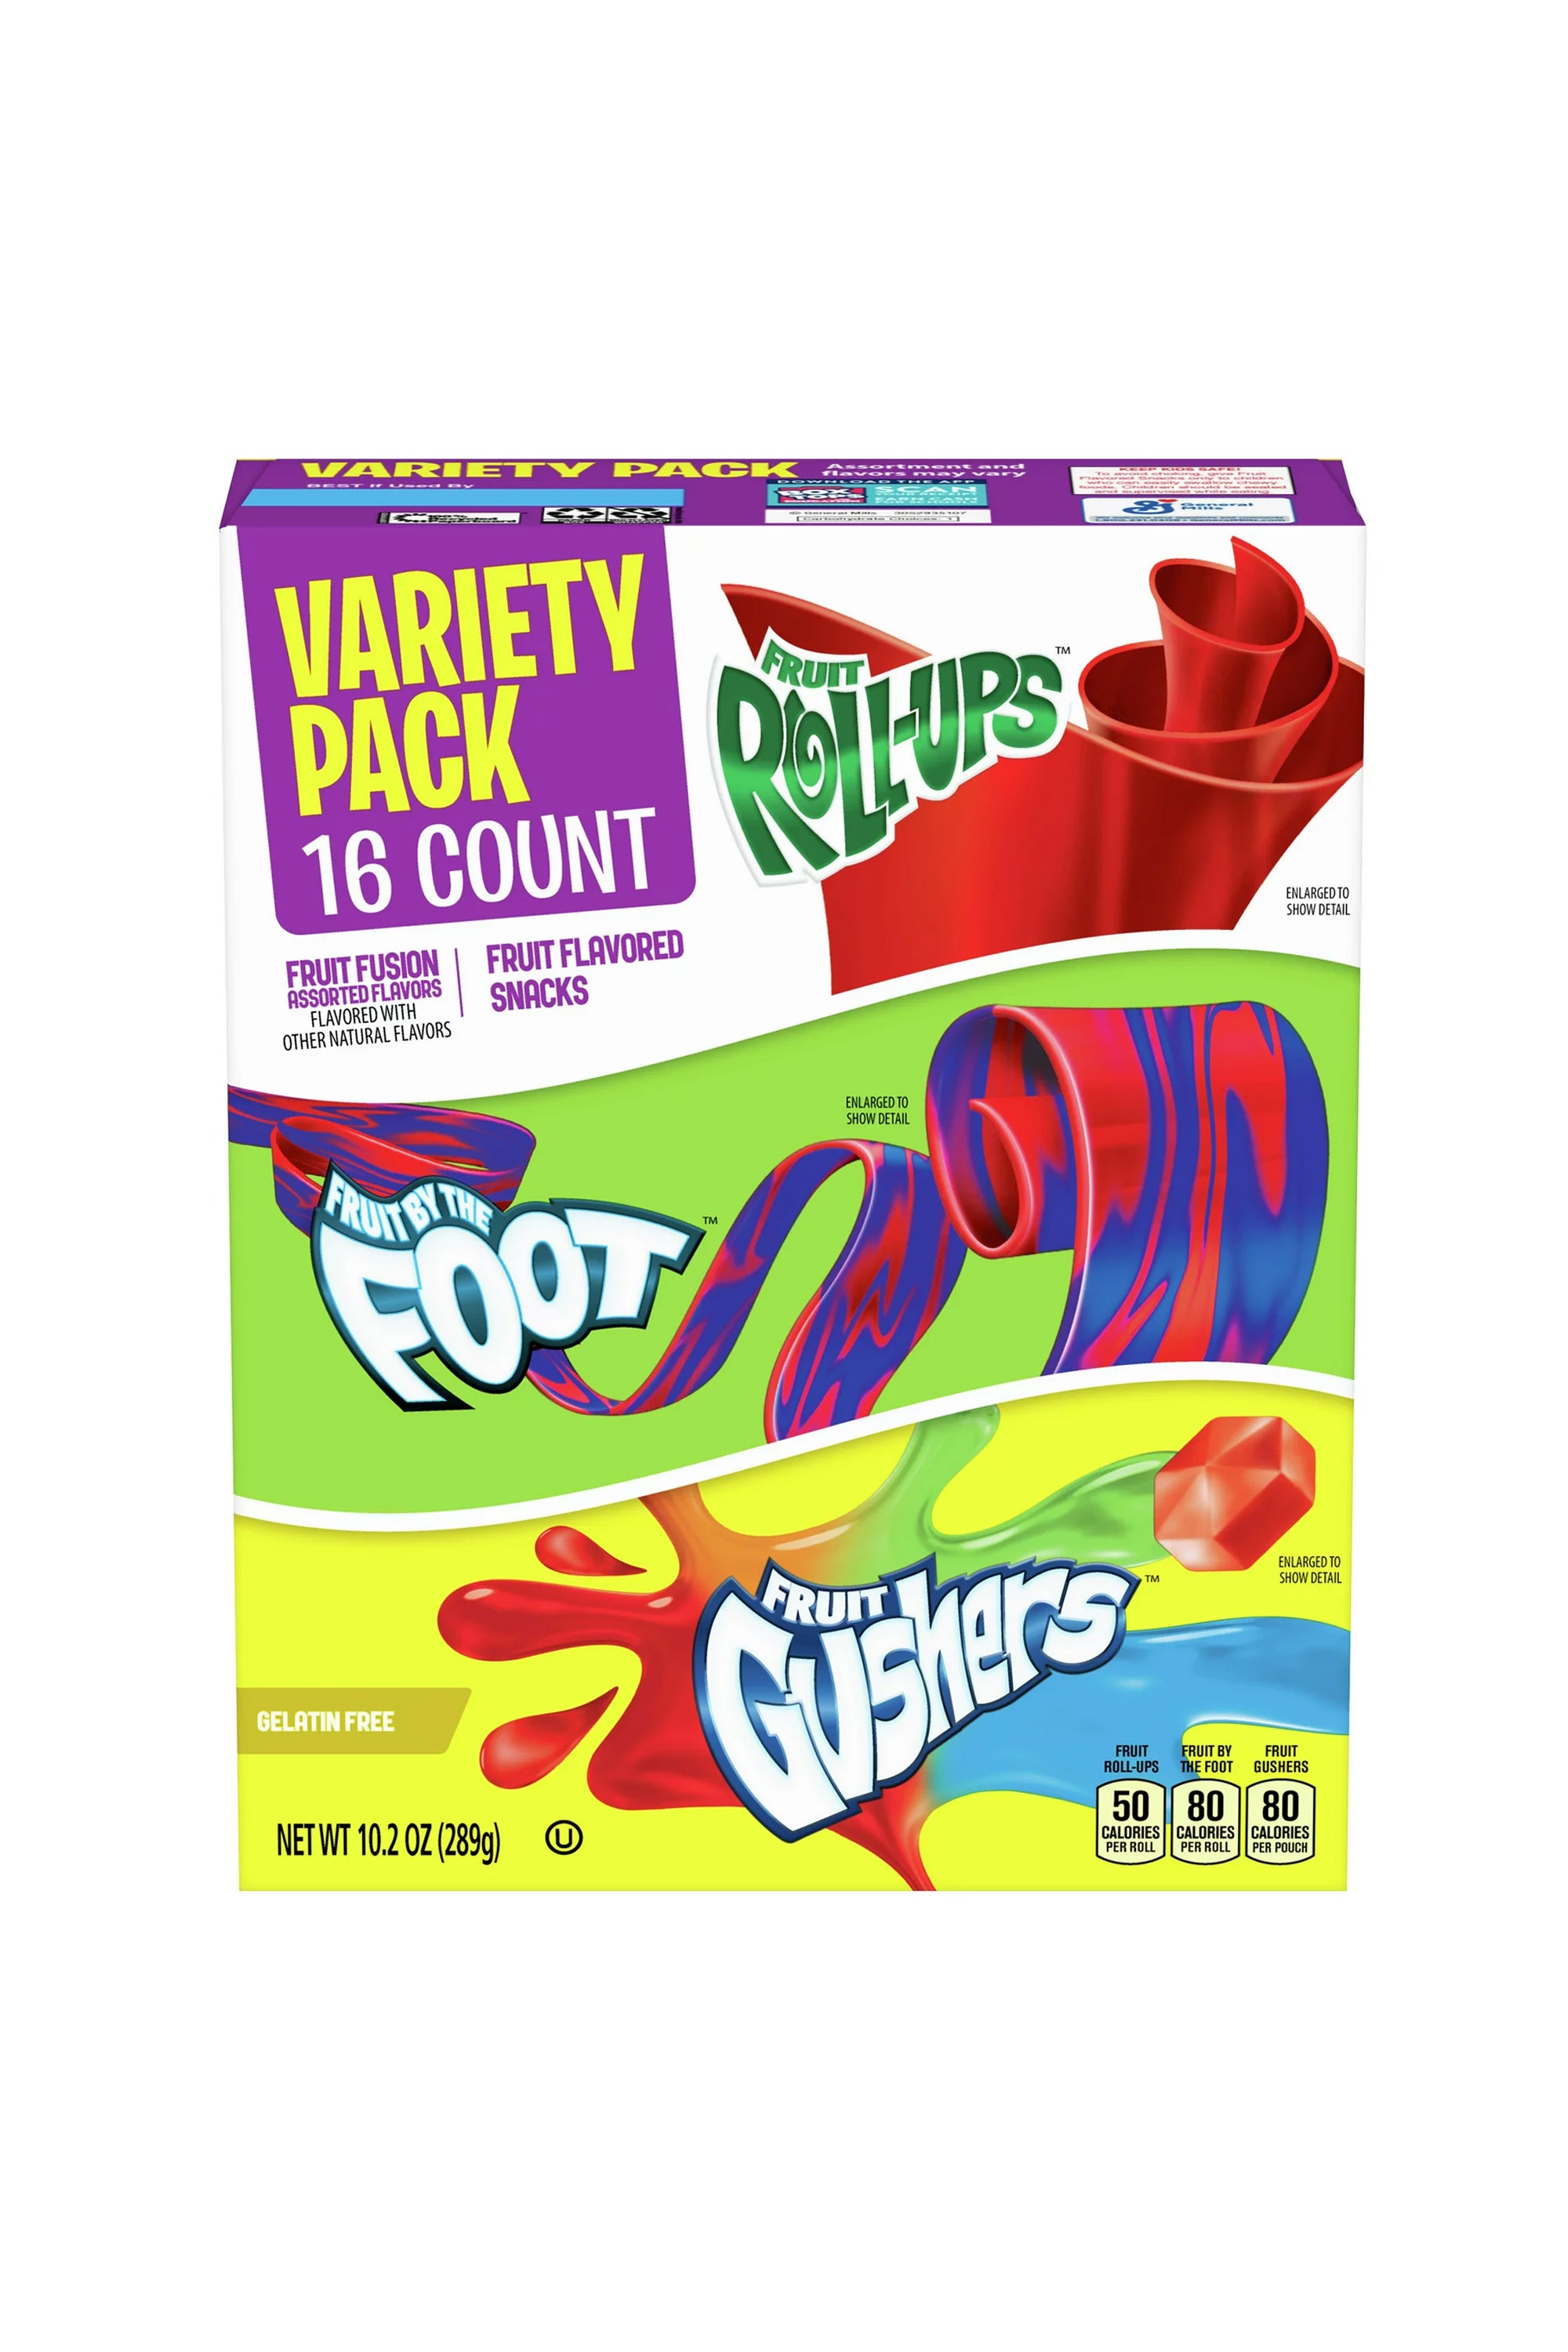 This Is A Box Of Gushers, Wrapped In Fruit Roll-Ups, Wrapped In